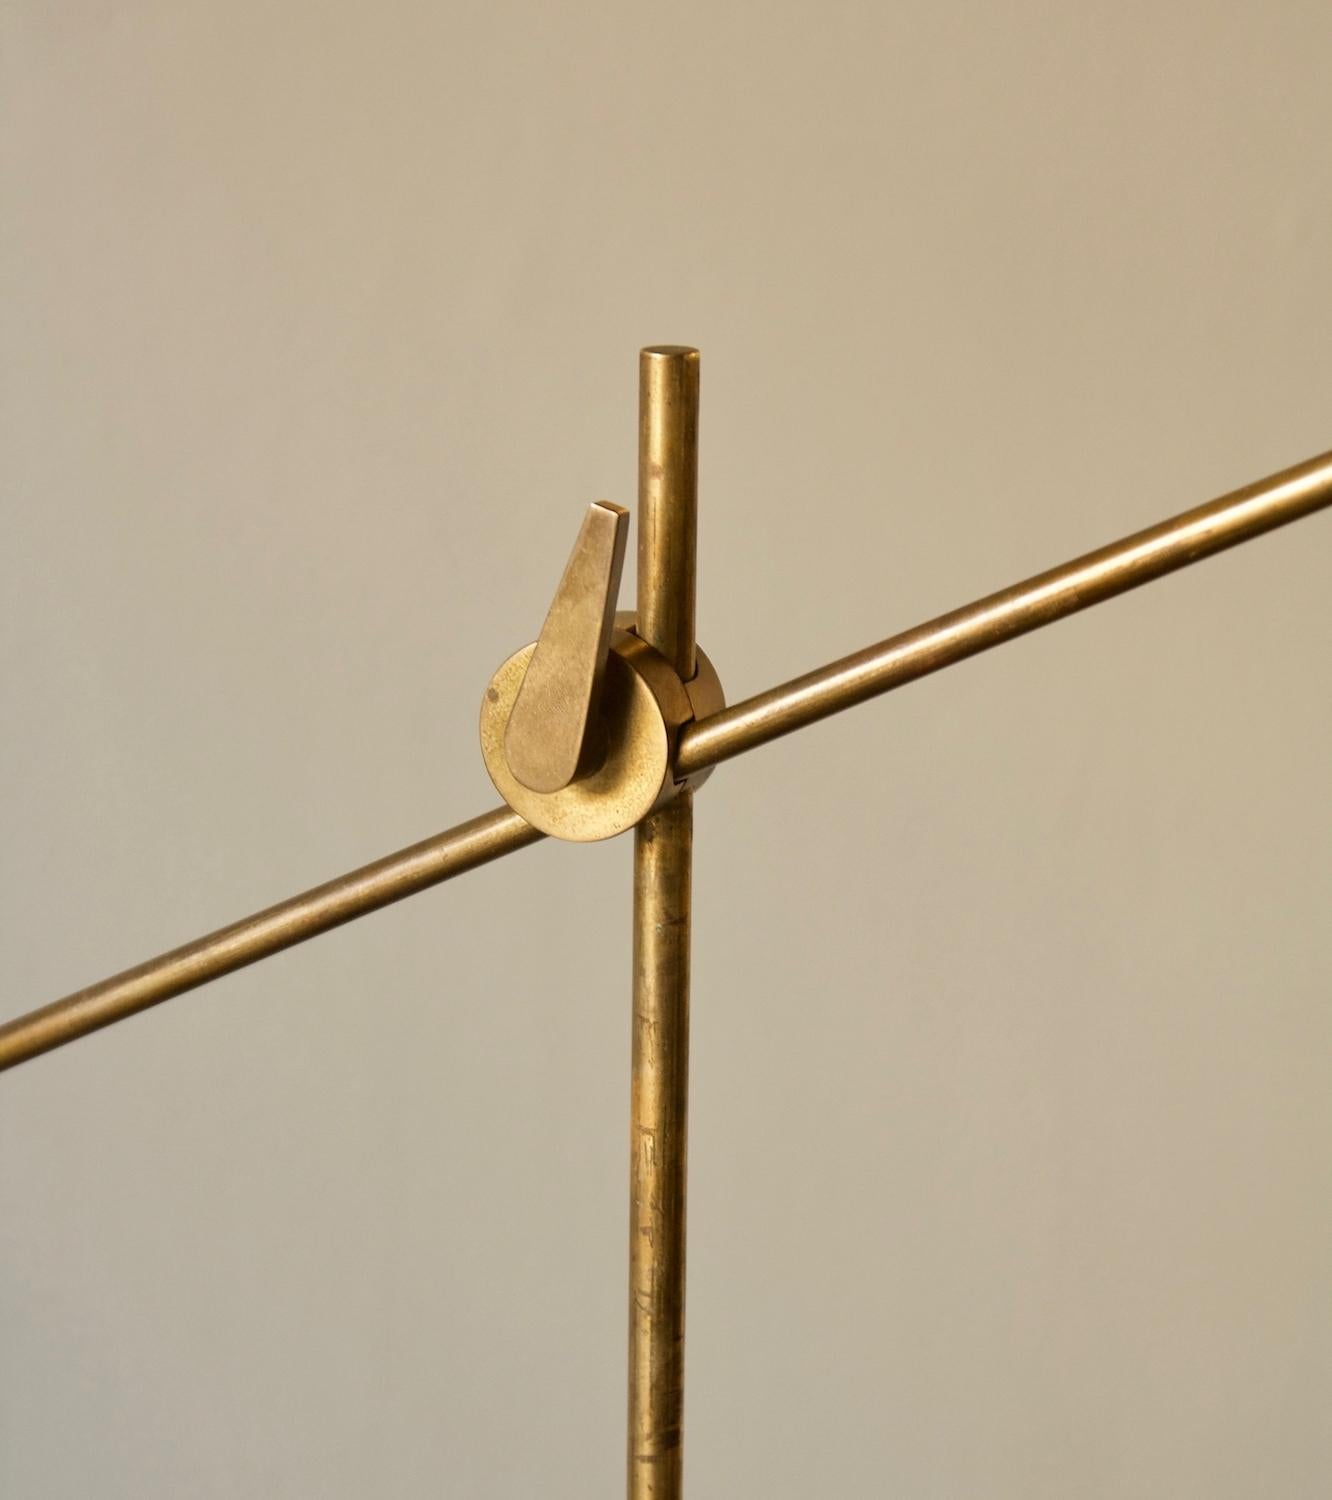 A vintage floor lamp designed and made by Le Klint in the late-1940s, Denmark, in the same period. The light is predominately made of solid brass and is complete with the original formed-aluminum shade. The cone shaped shade is lacquered in a matte